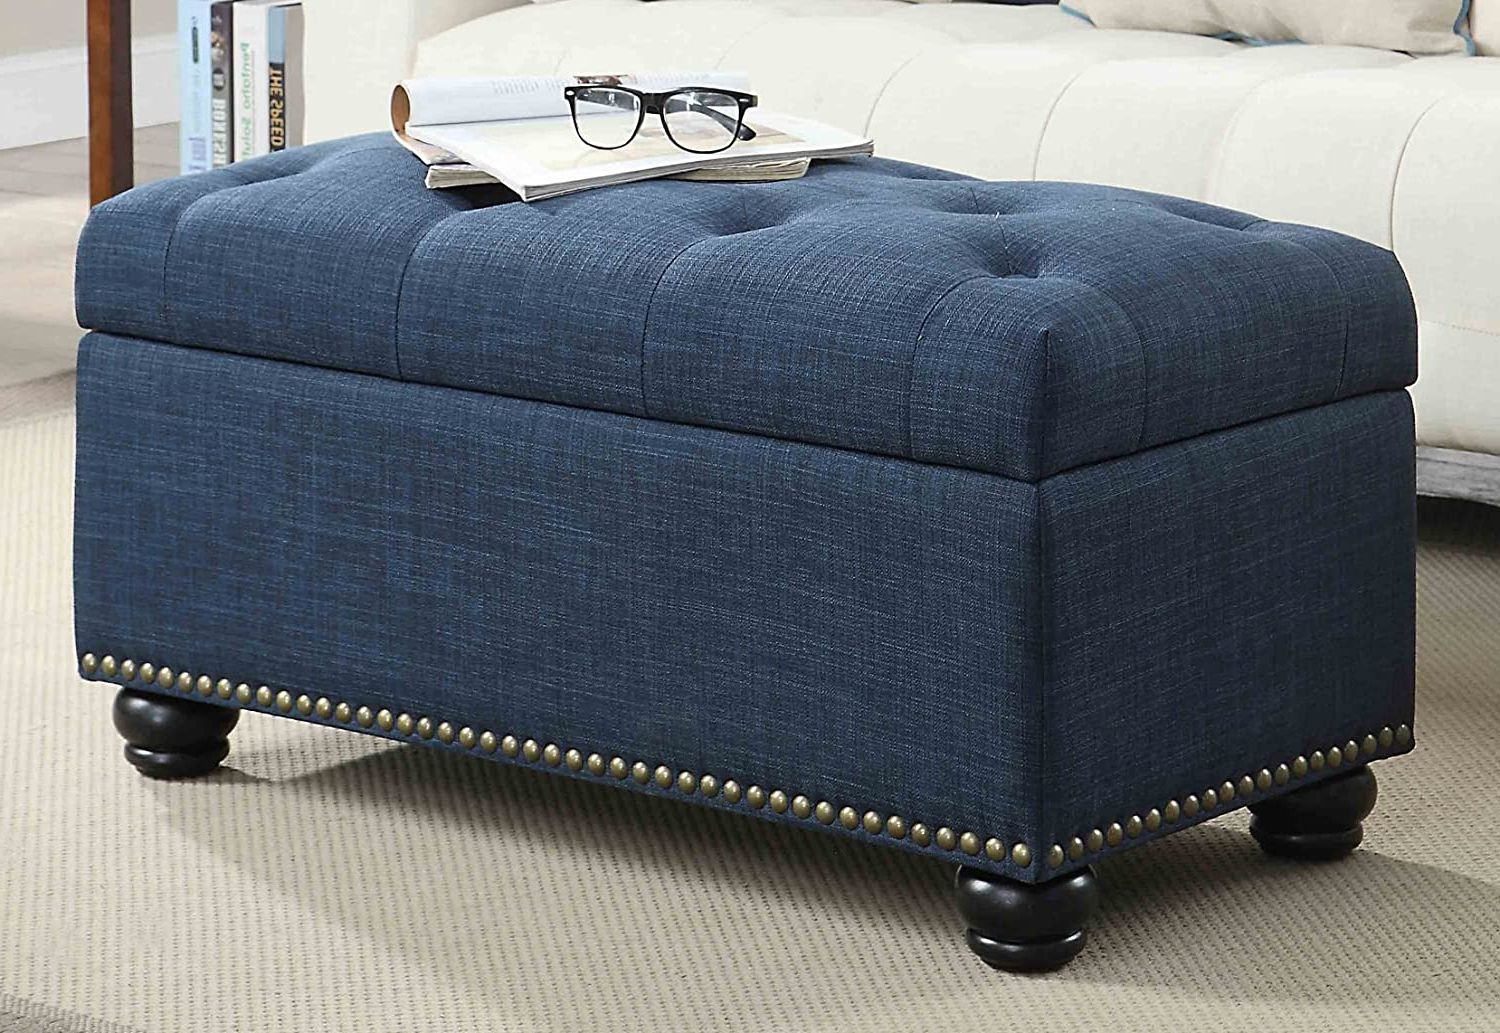 Most Recent Convenience Concepts Designs4comfort 7th Avenue Storage Ottoman, Blue Intended For Fabric Storage Ottomans (View 7 of 10)